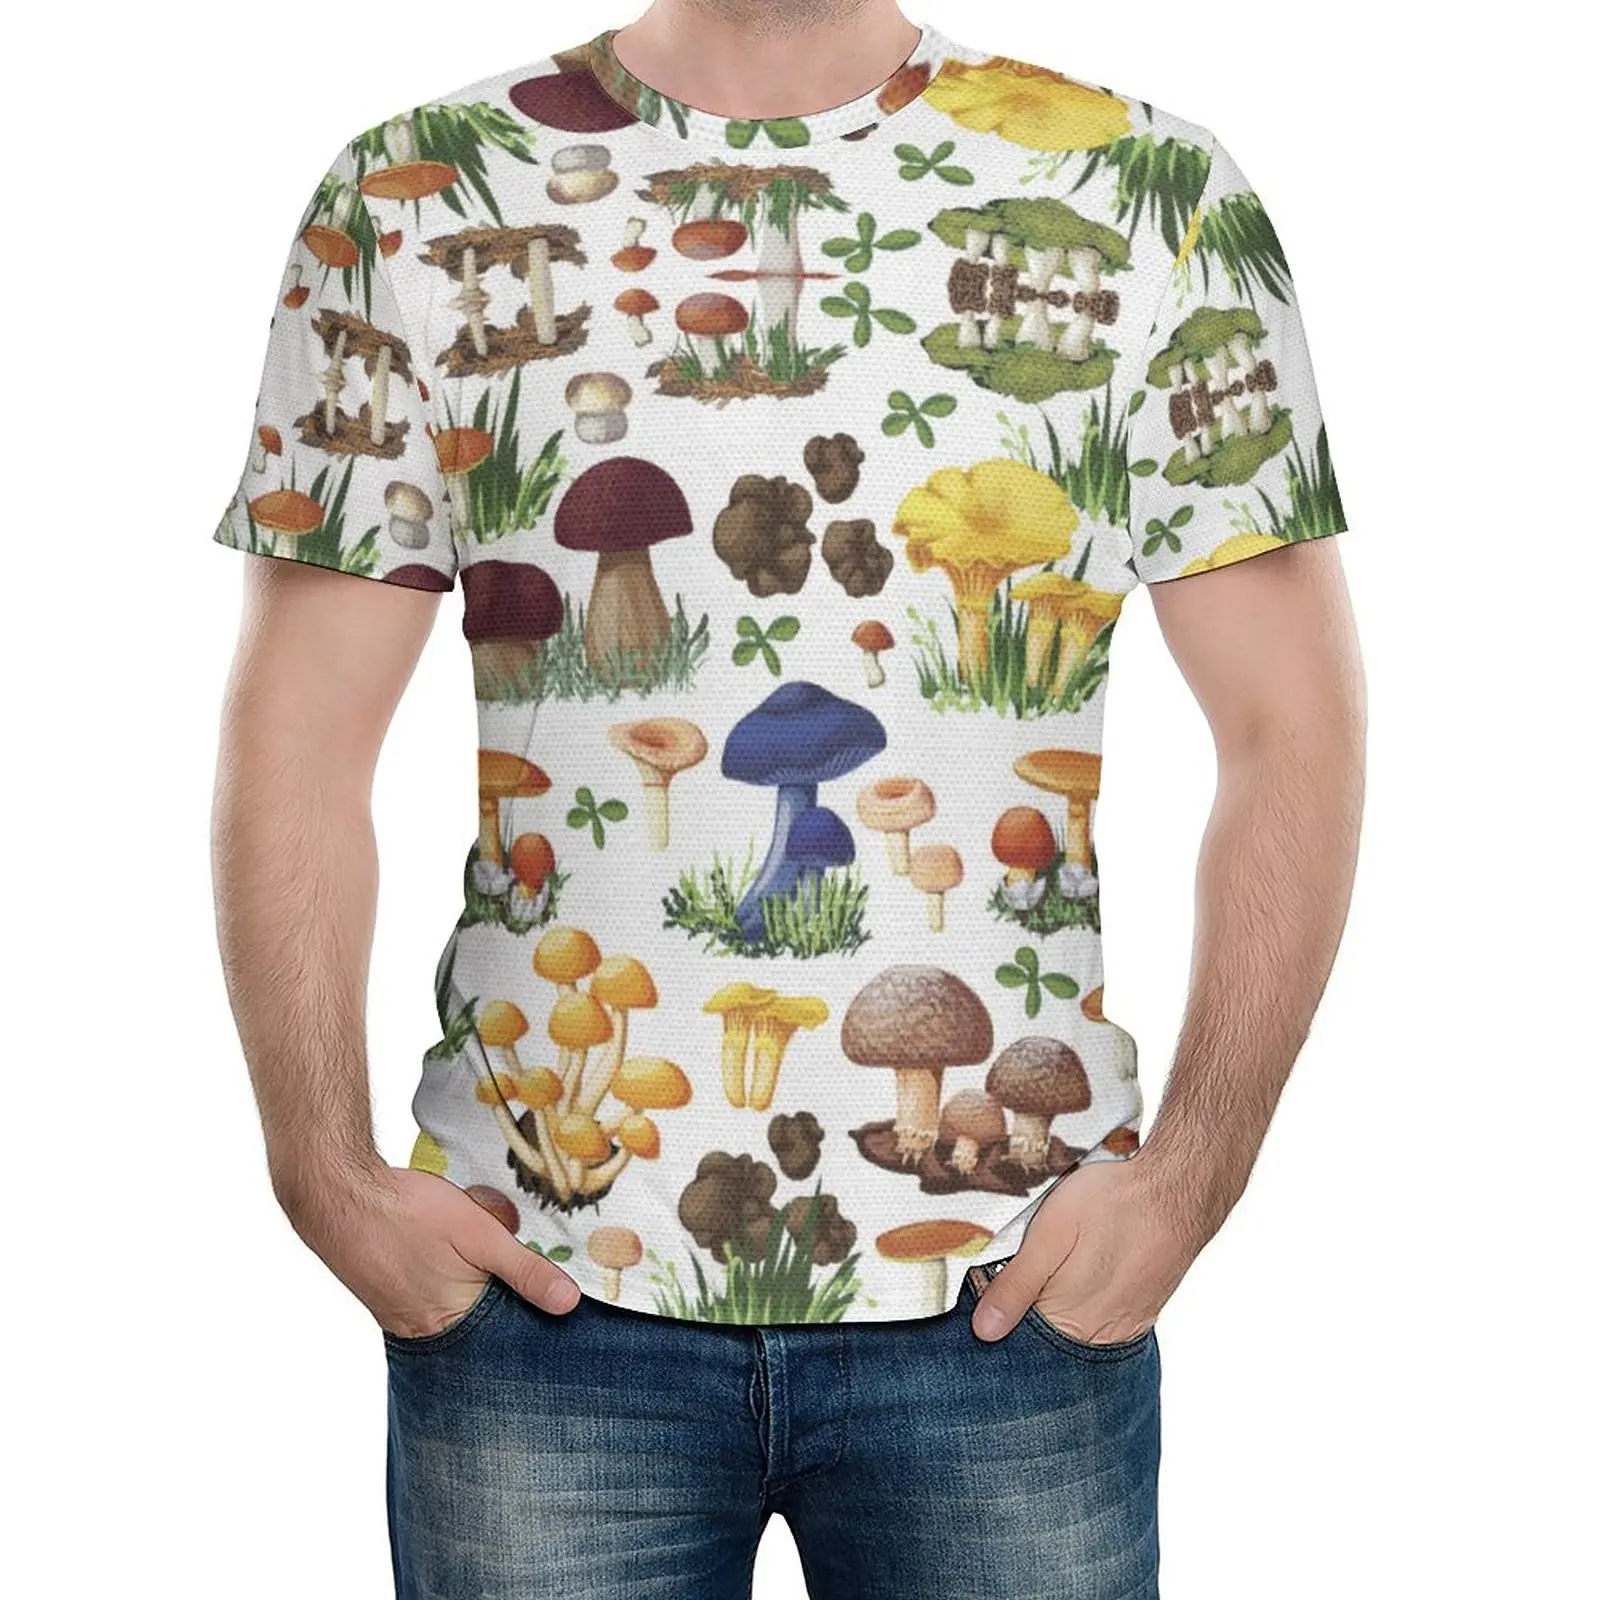 

T-shirts Pattern with Types of Mushrooms Wild Species Organic Natural Food Garden Theme Graphic Cool Activity Competition Eur